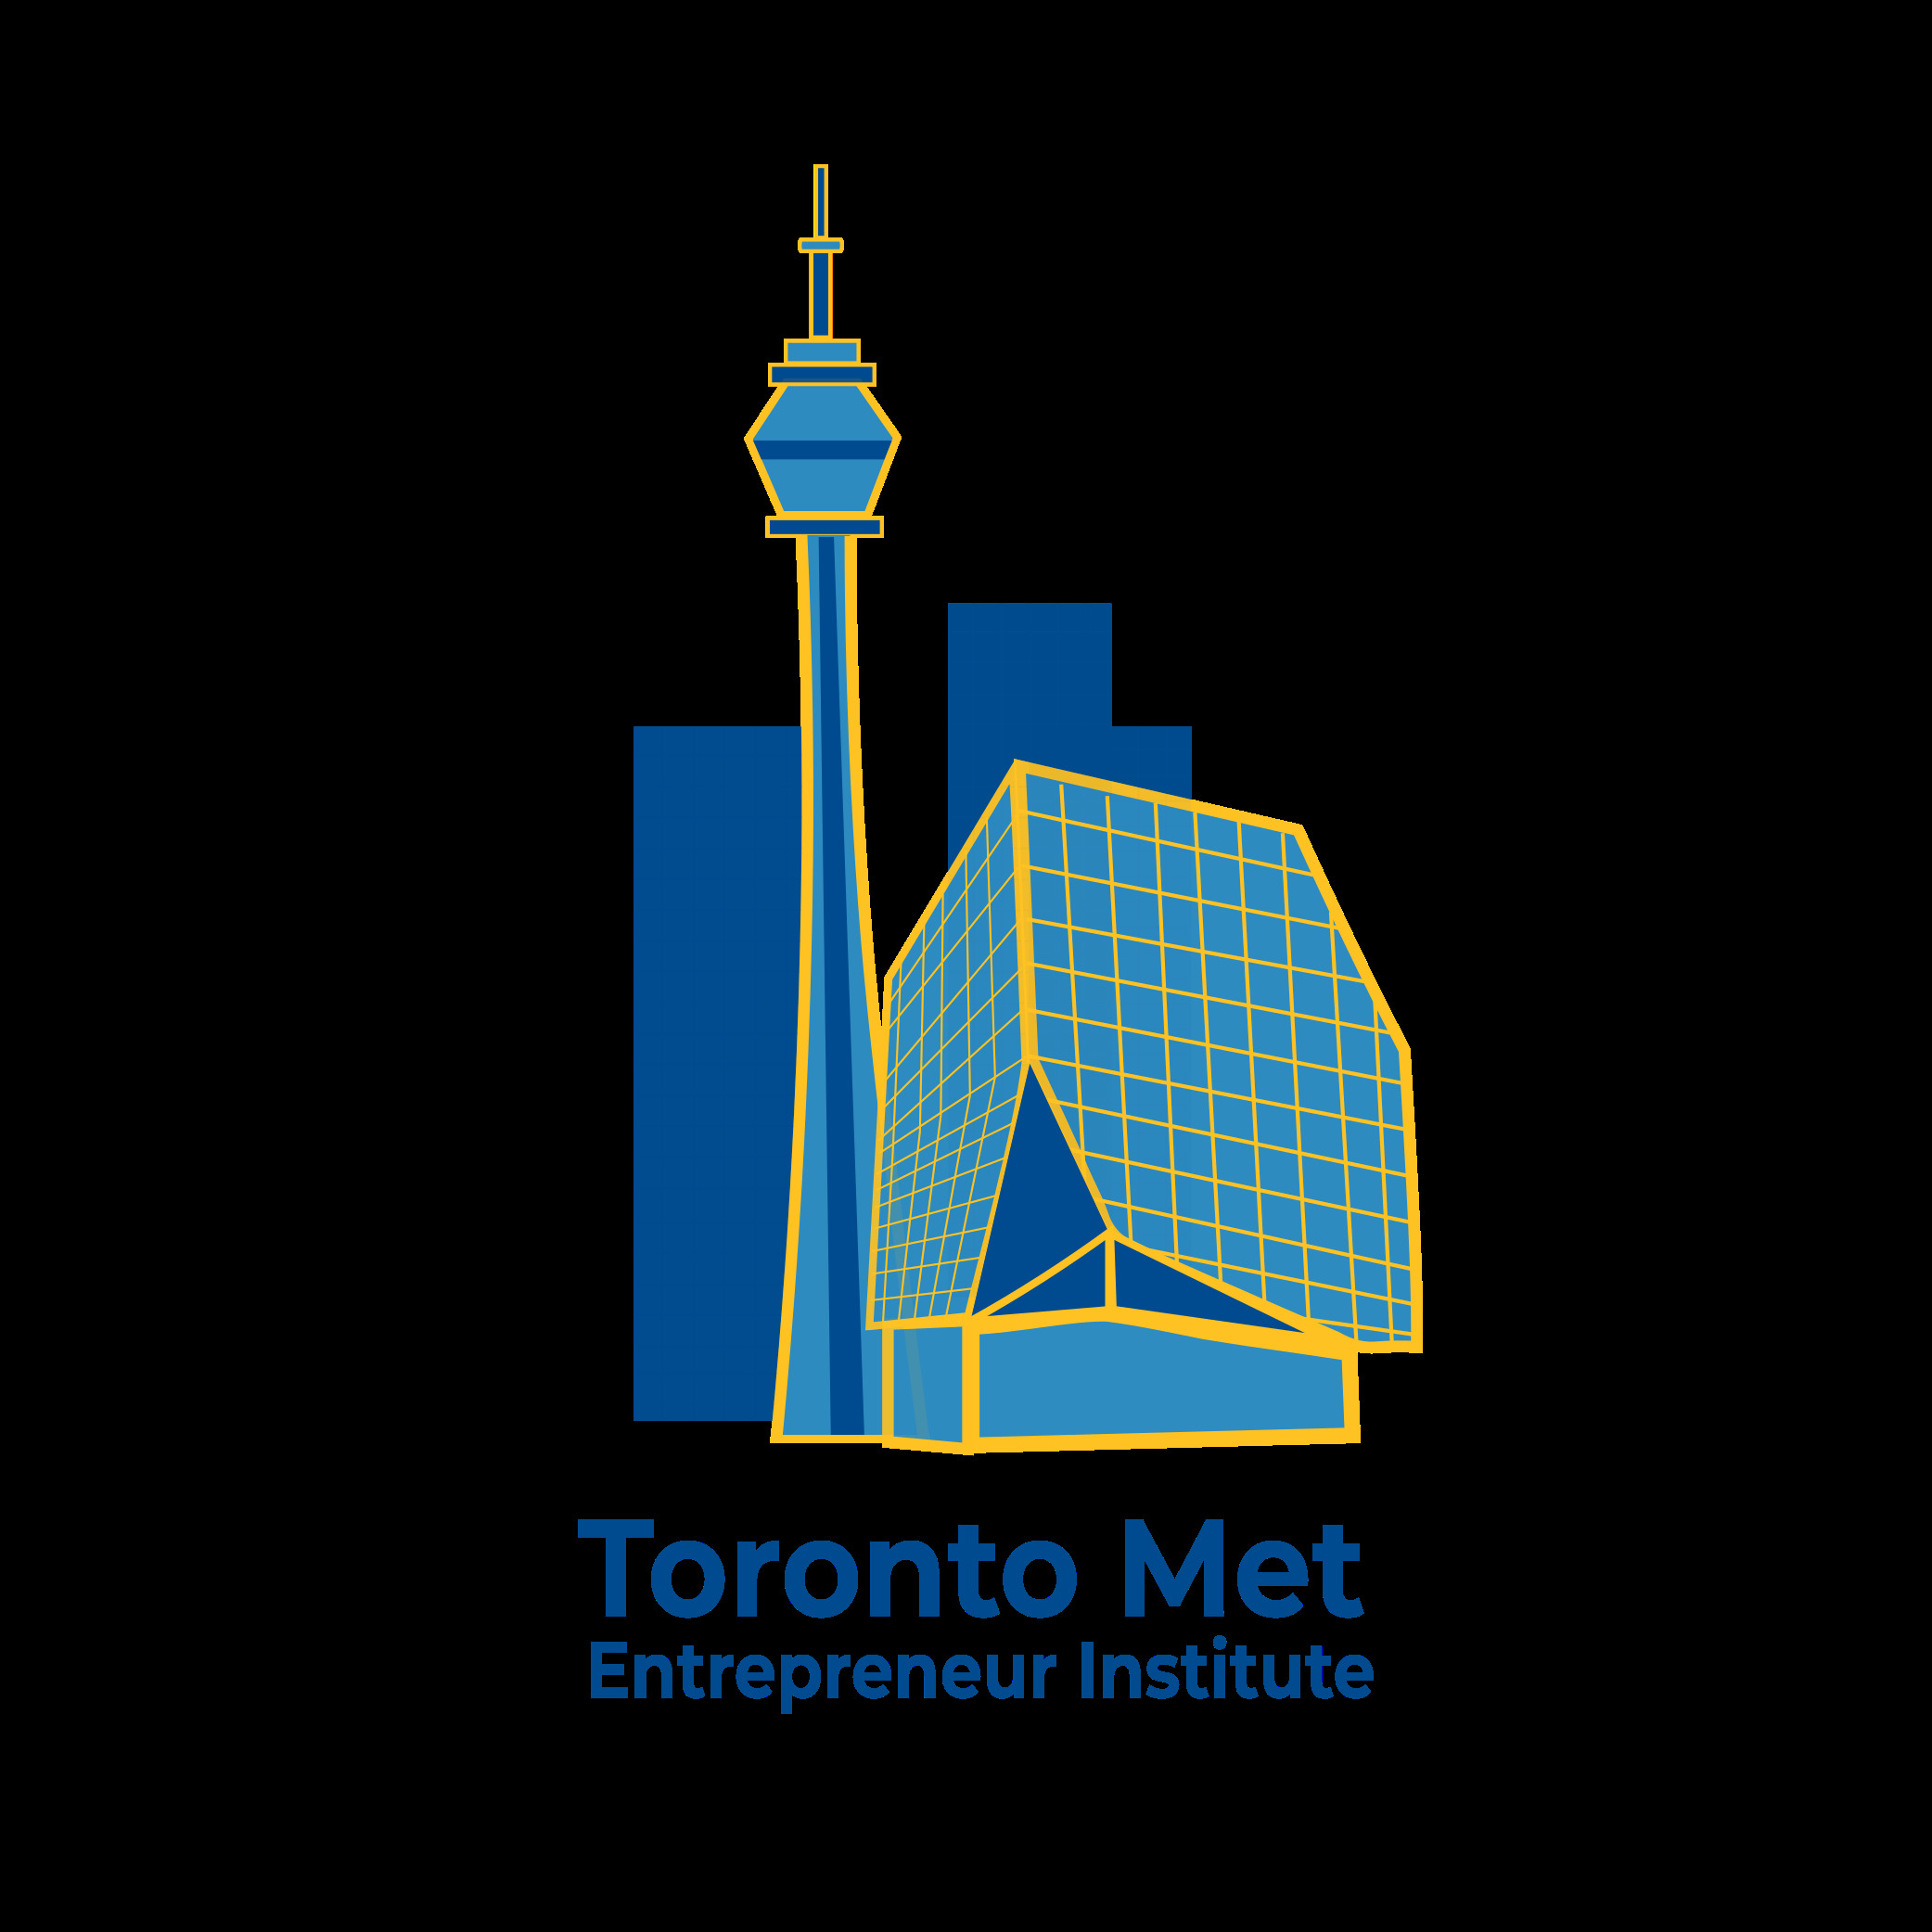 Logo of the Toronto Met Entrepreneur Institute which shows the CN tower beside the Ryerson Student learnign center